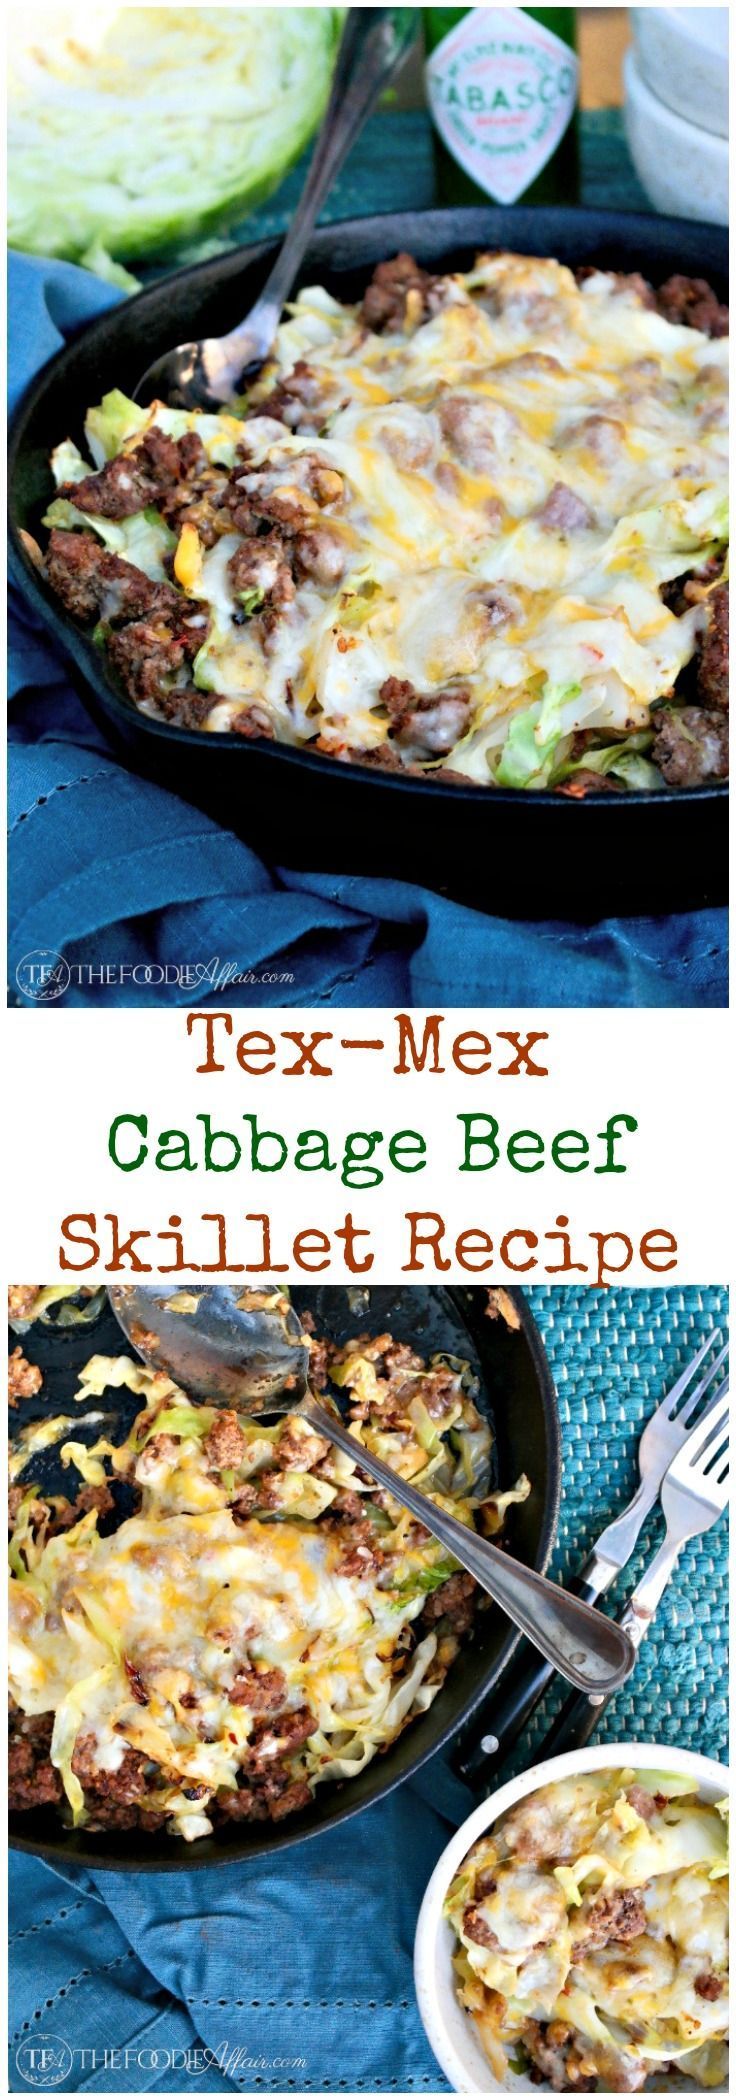 Tex Mex Cabbage Beef Skillet Recipe Topped with Spicy Mexican Cheese Blend -   25 low carb beef recipes
 ideas